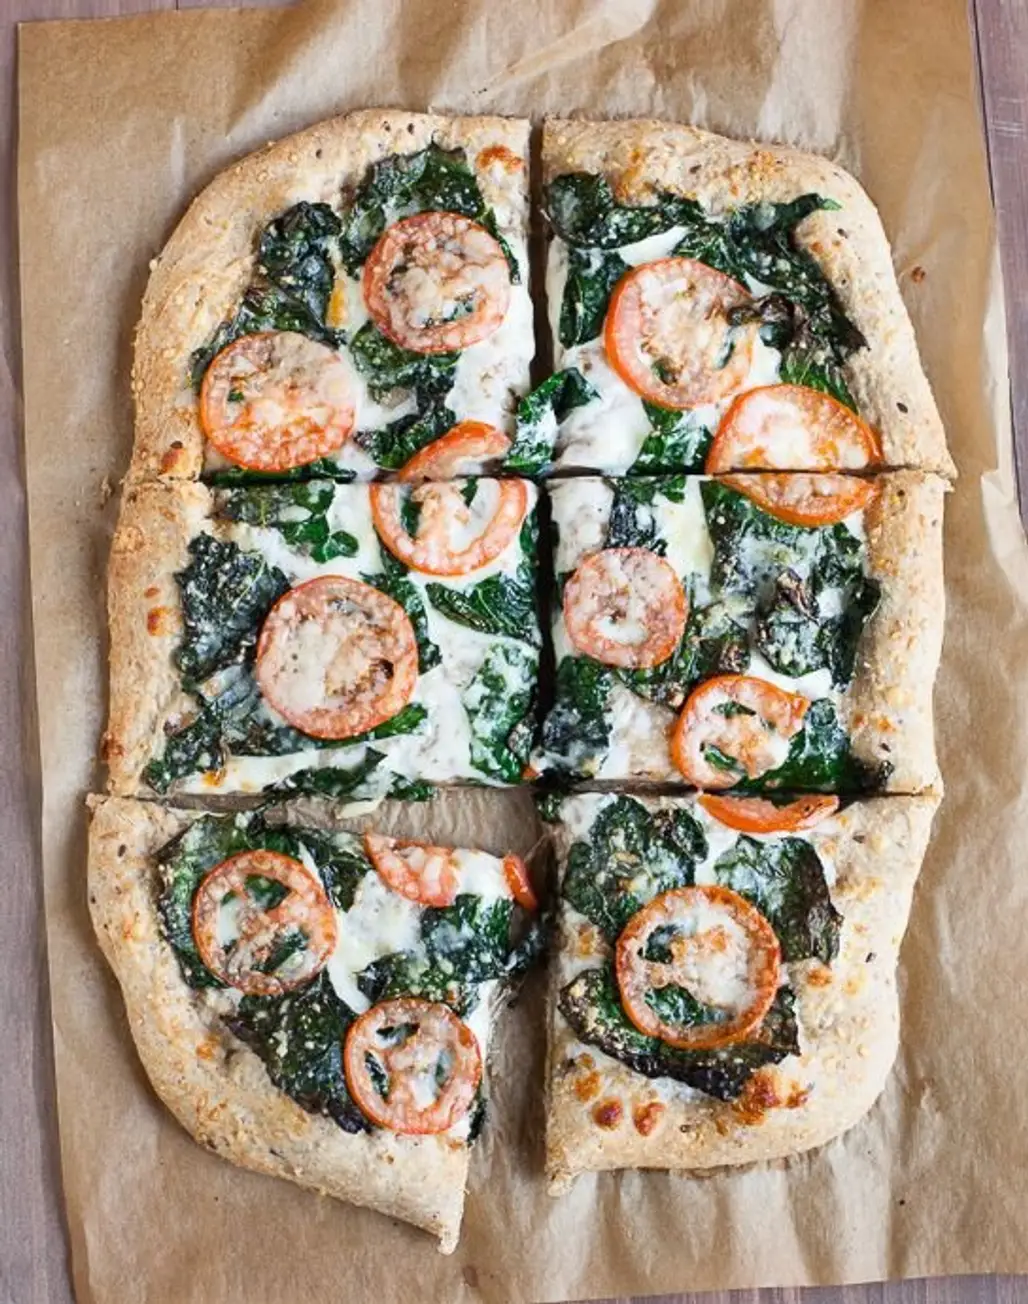 Bake up a Large Pizza Pie for Your Family